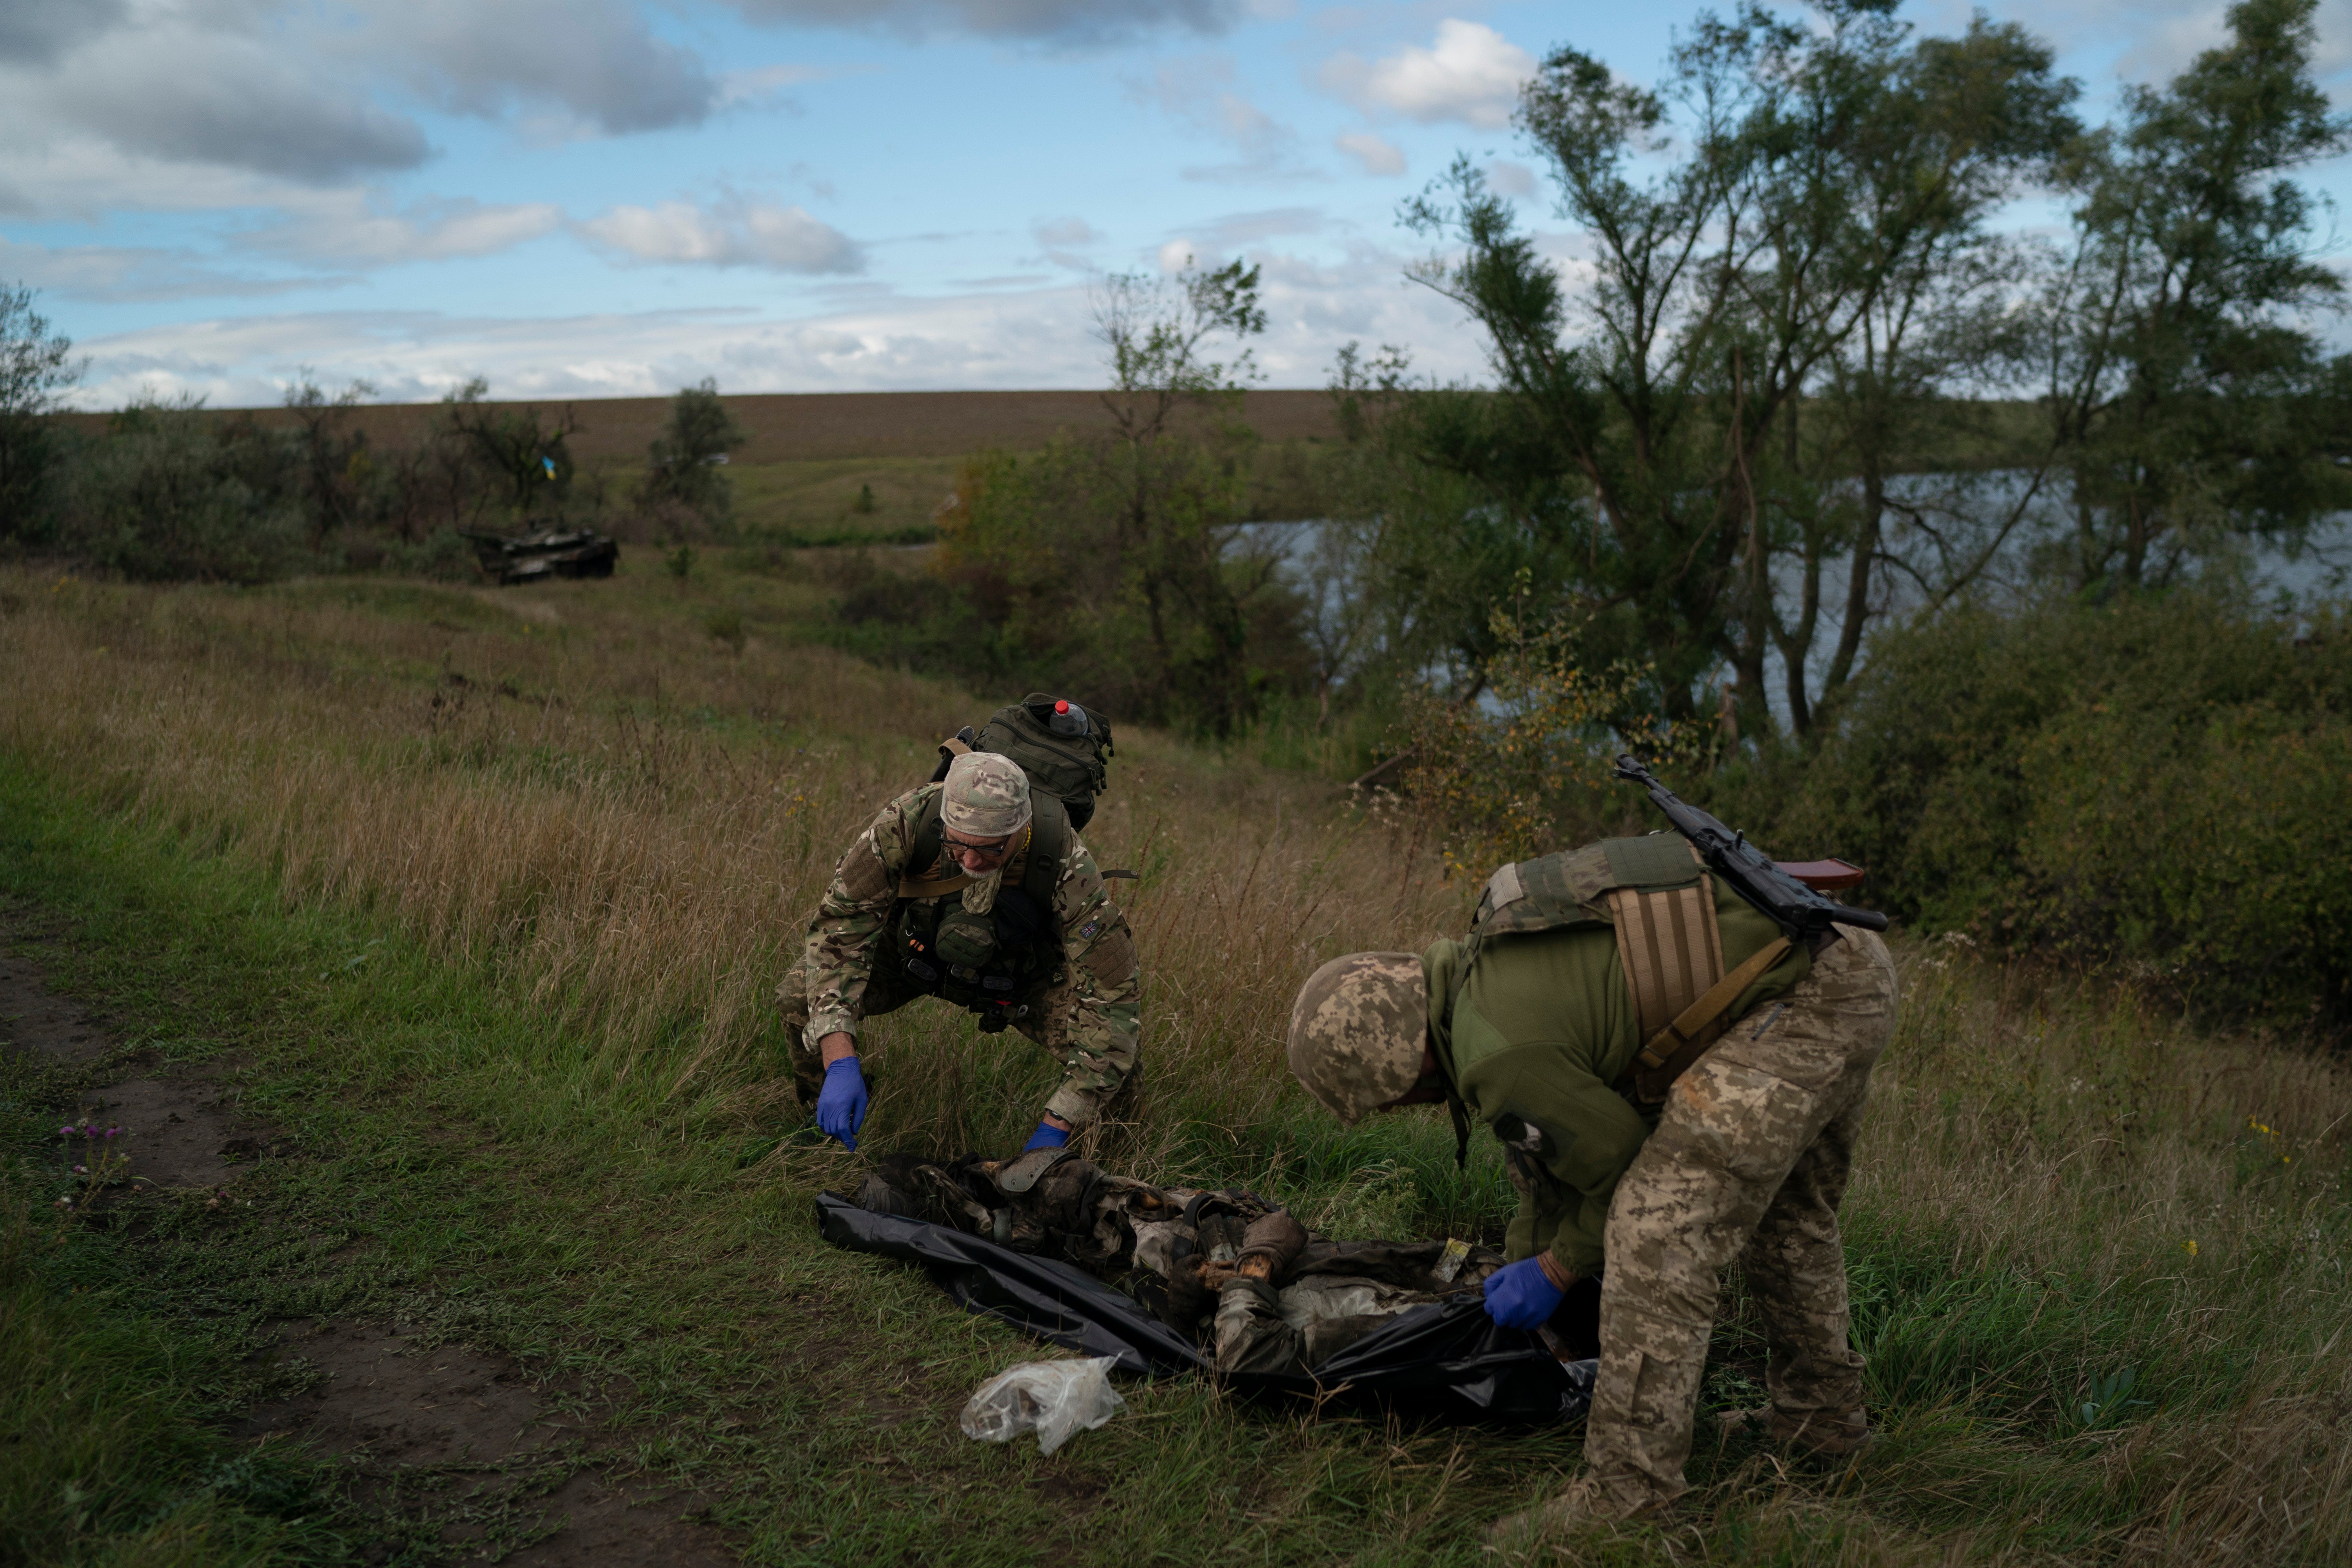 Ukrainian National Guard servicemen place the body of a Ukrainian soldier in a bag at an area near the border with Russia, in Kharkiv region, Ukraine